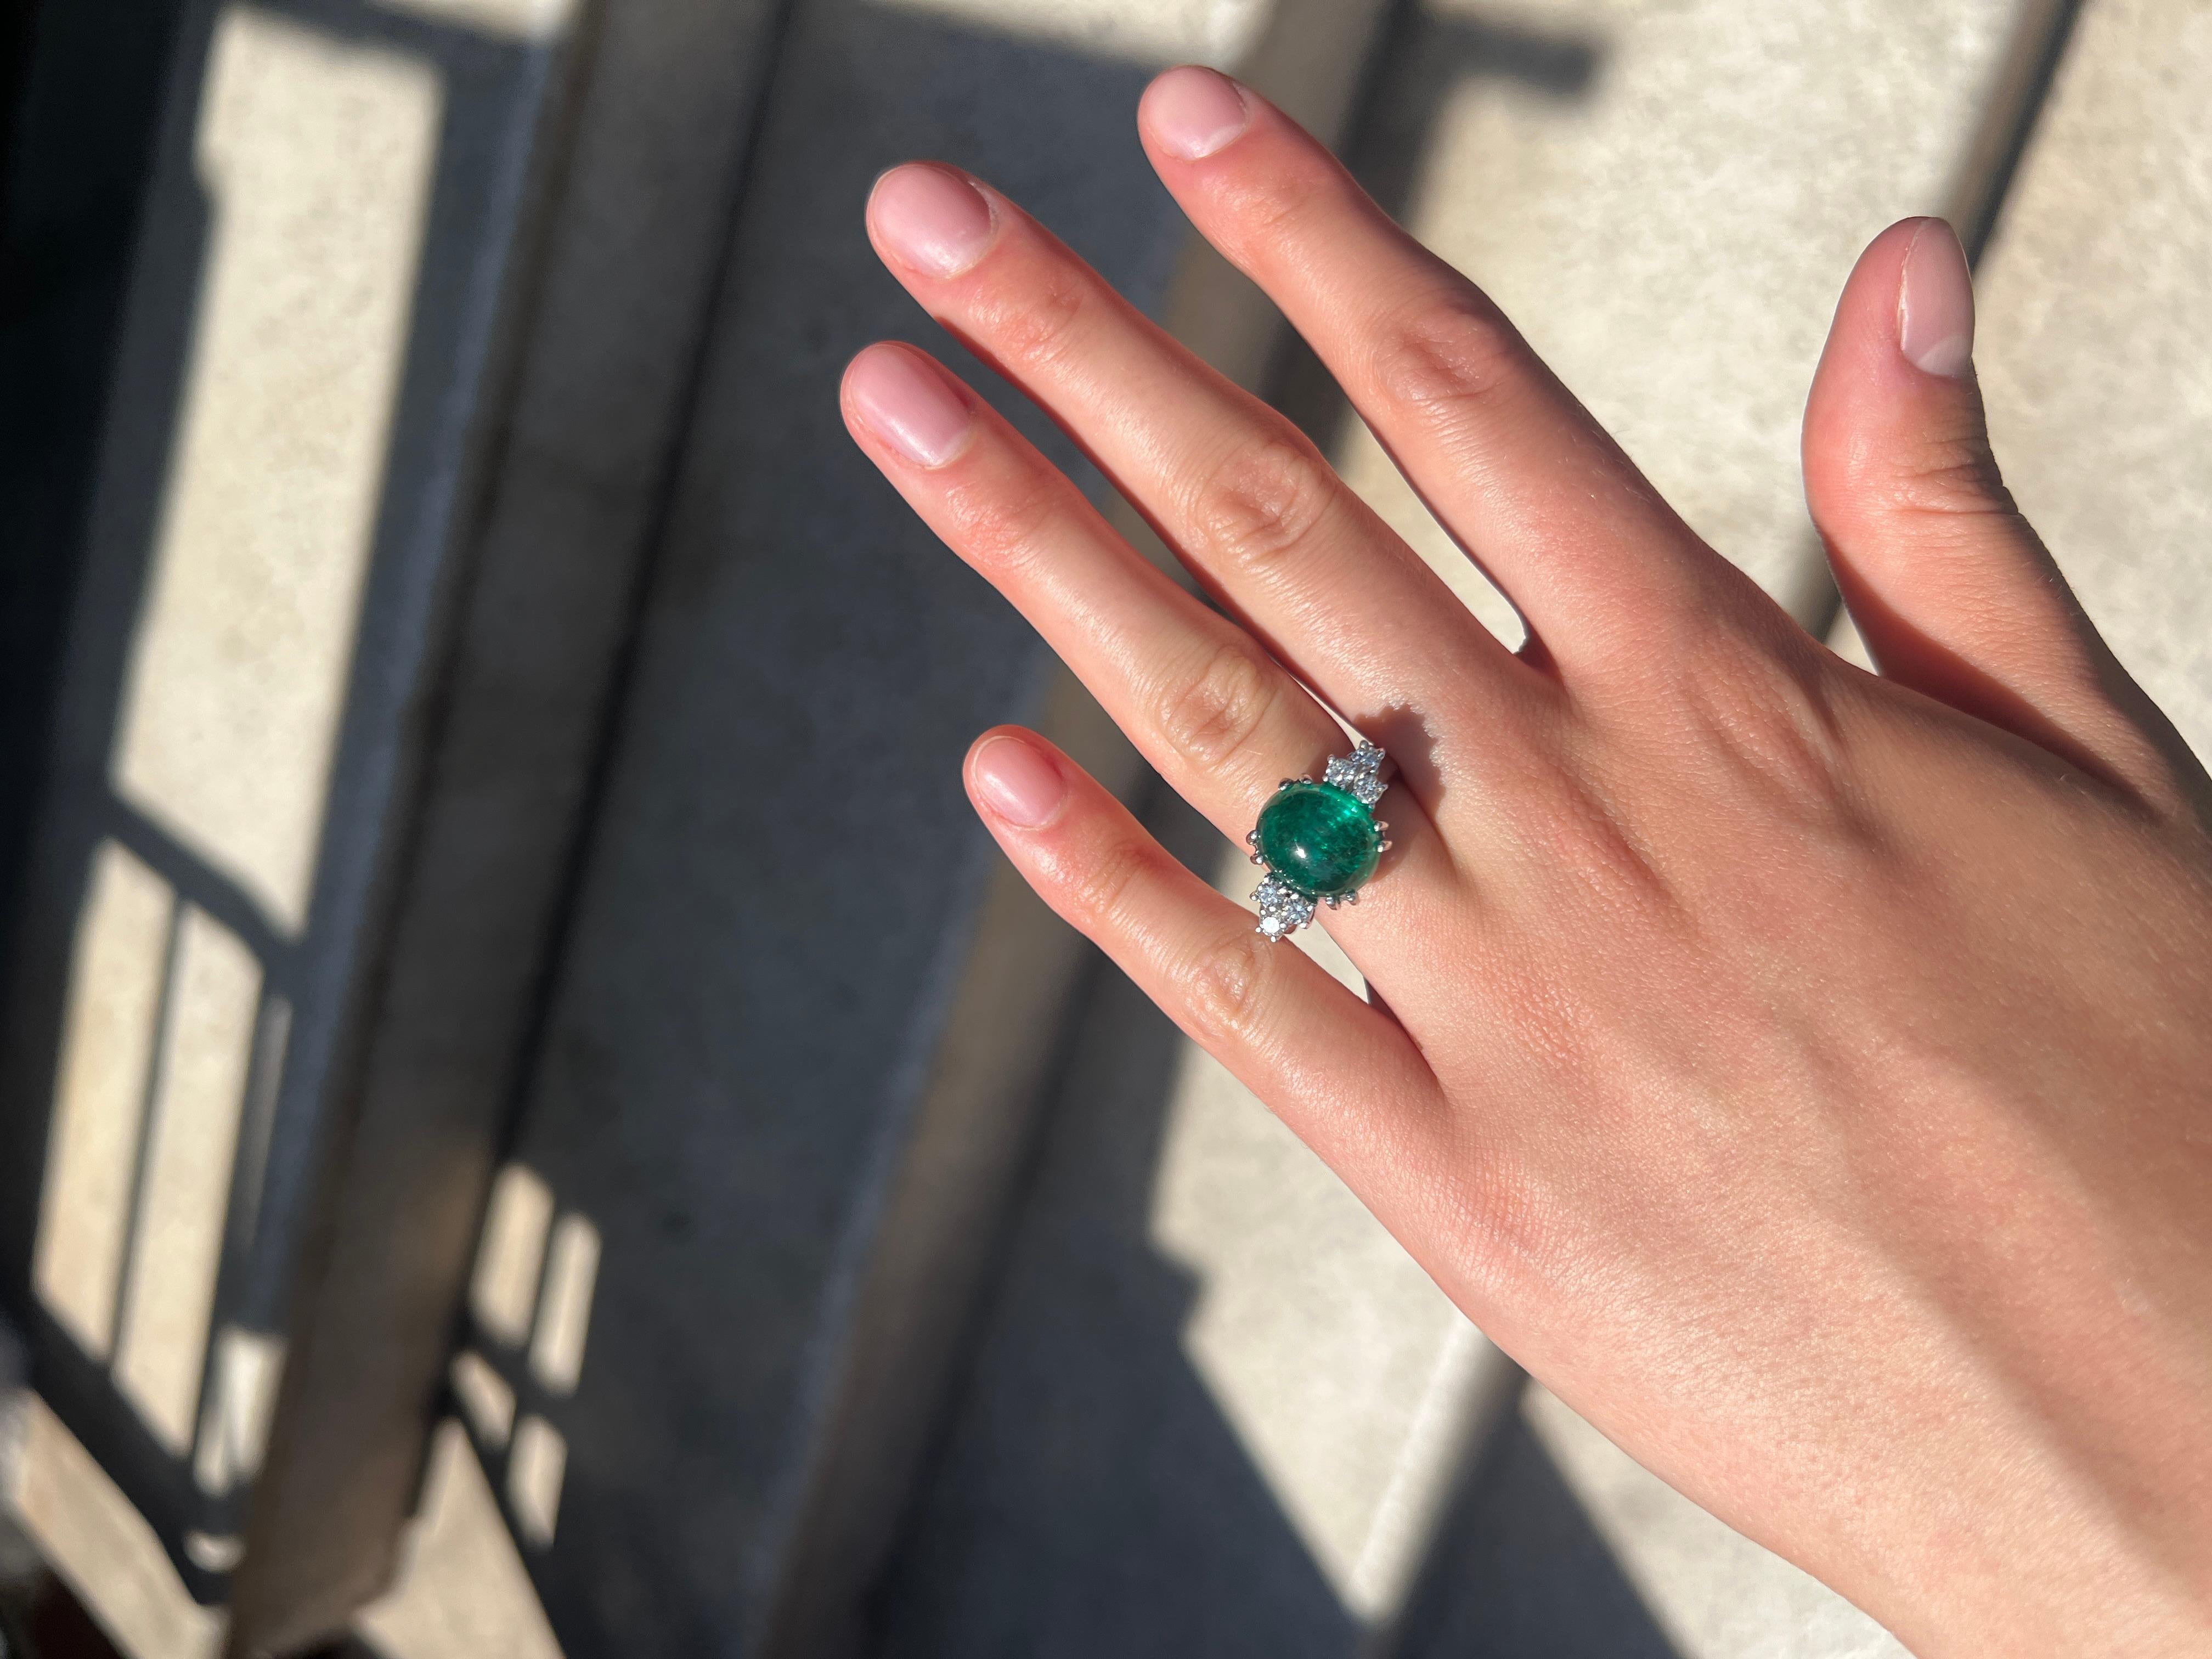 The stunning emerald diamond ring from the 1970s is a mesmerizing piece of jewelry that exudes elegance and charm. Set in white gold, this ring showcases a captivating emerald gemstone at its center, radiating a vibrant and enchanting green hue. The